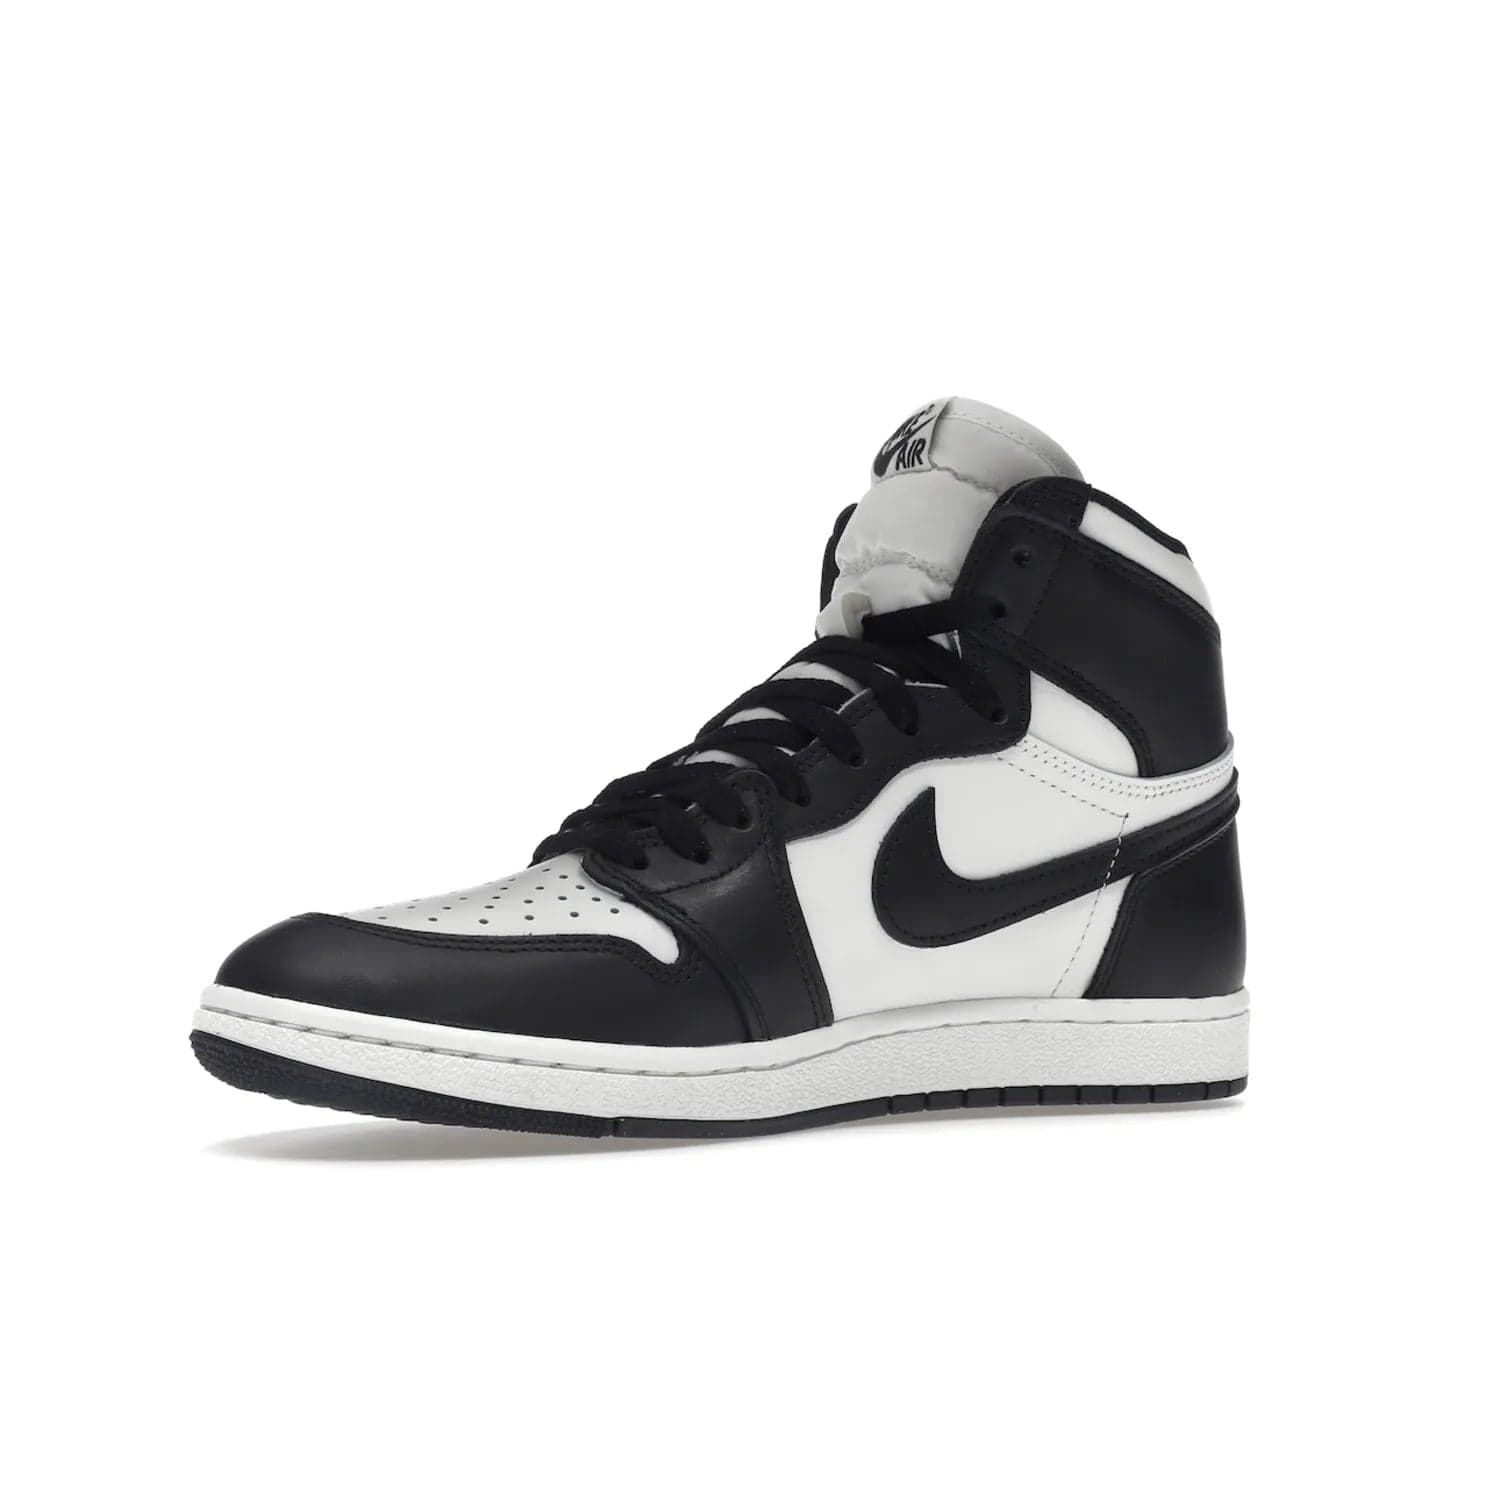 Jordan 1 Retro High 85 Black White (2023) - Image 16 - Only at www.BallersClubKickz.com - Brand new Jordan 1 Retro High 85 Black White (2023) now available. A classic color scheme of black and white leather uppers with signature Nike Air logo on the tongue. Must-have for any Air Jordan fan. Available February 15, 2023.